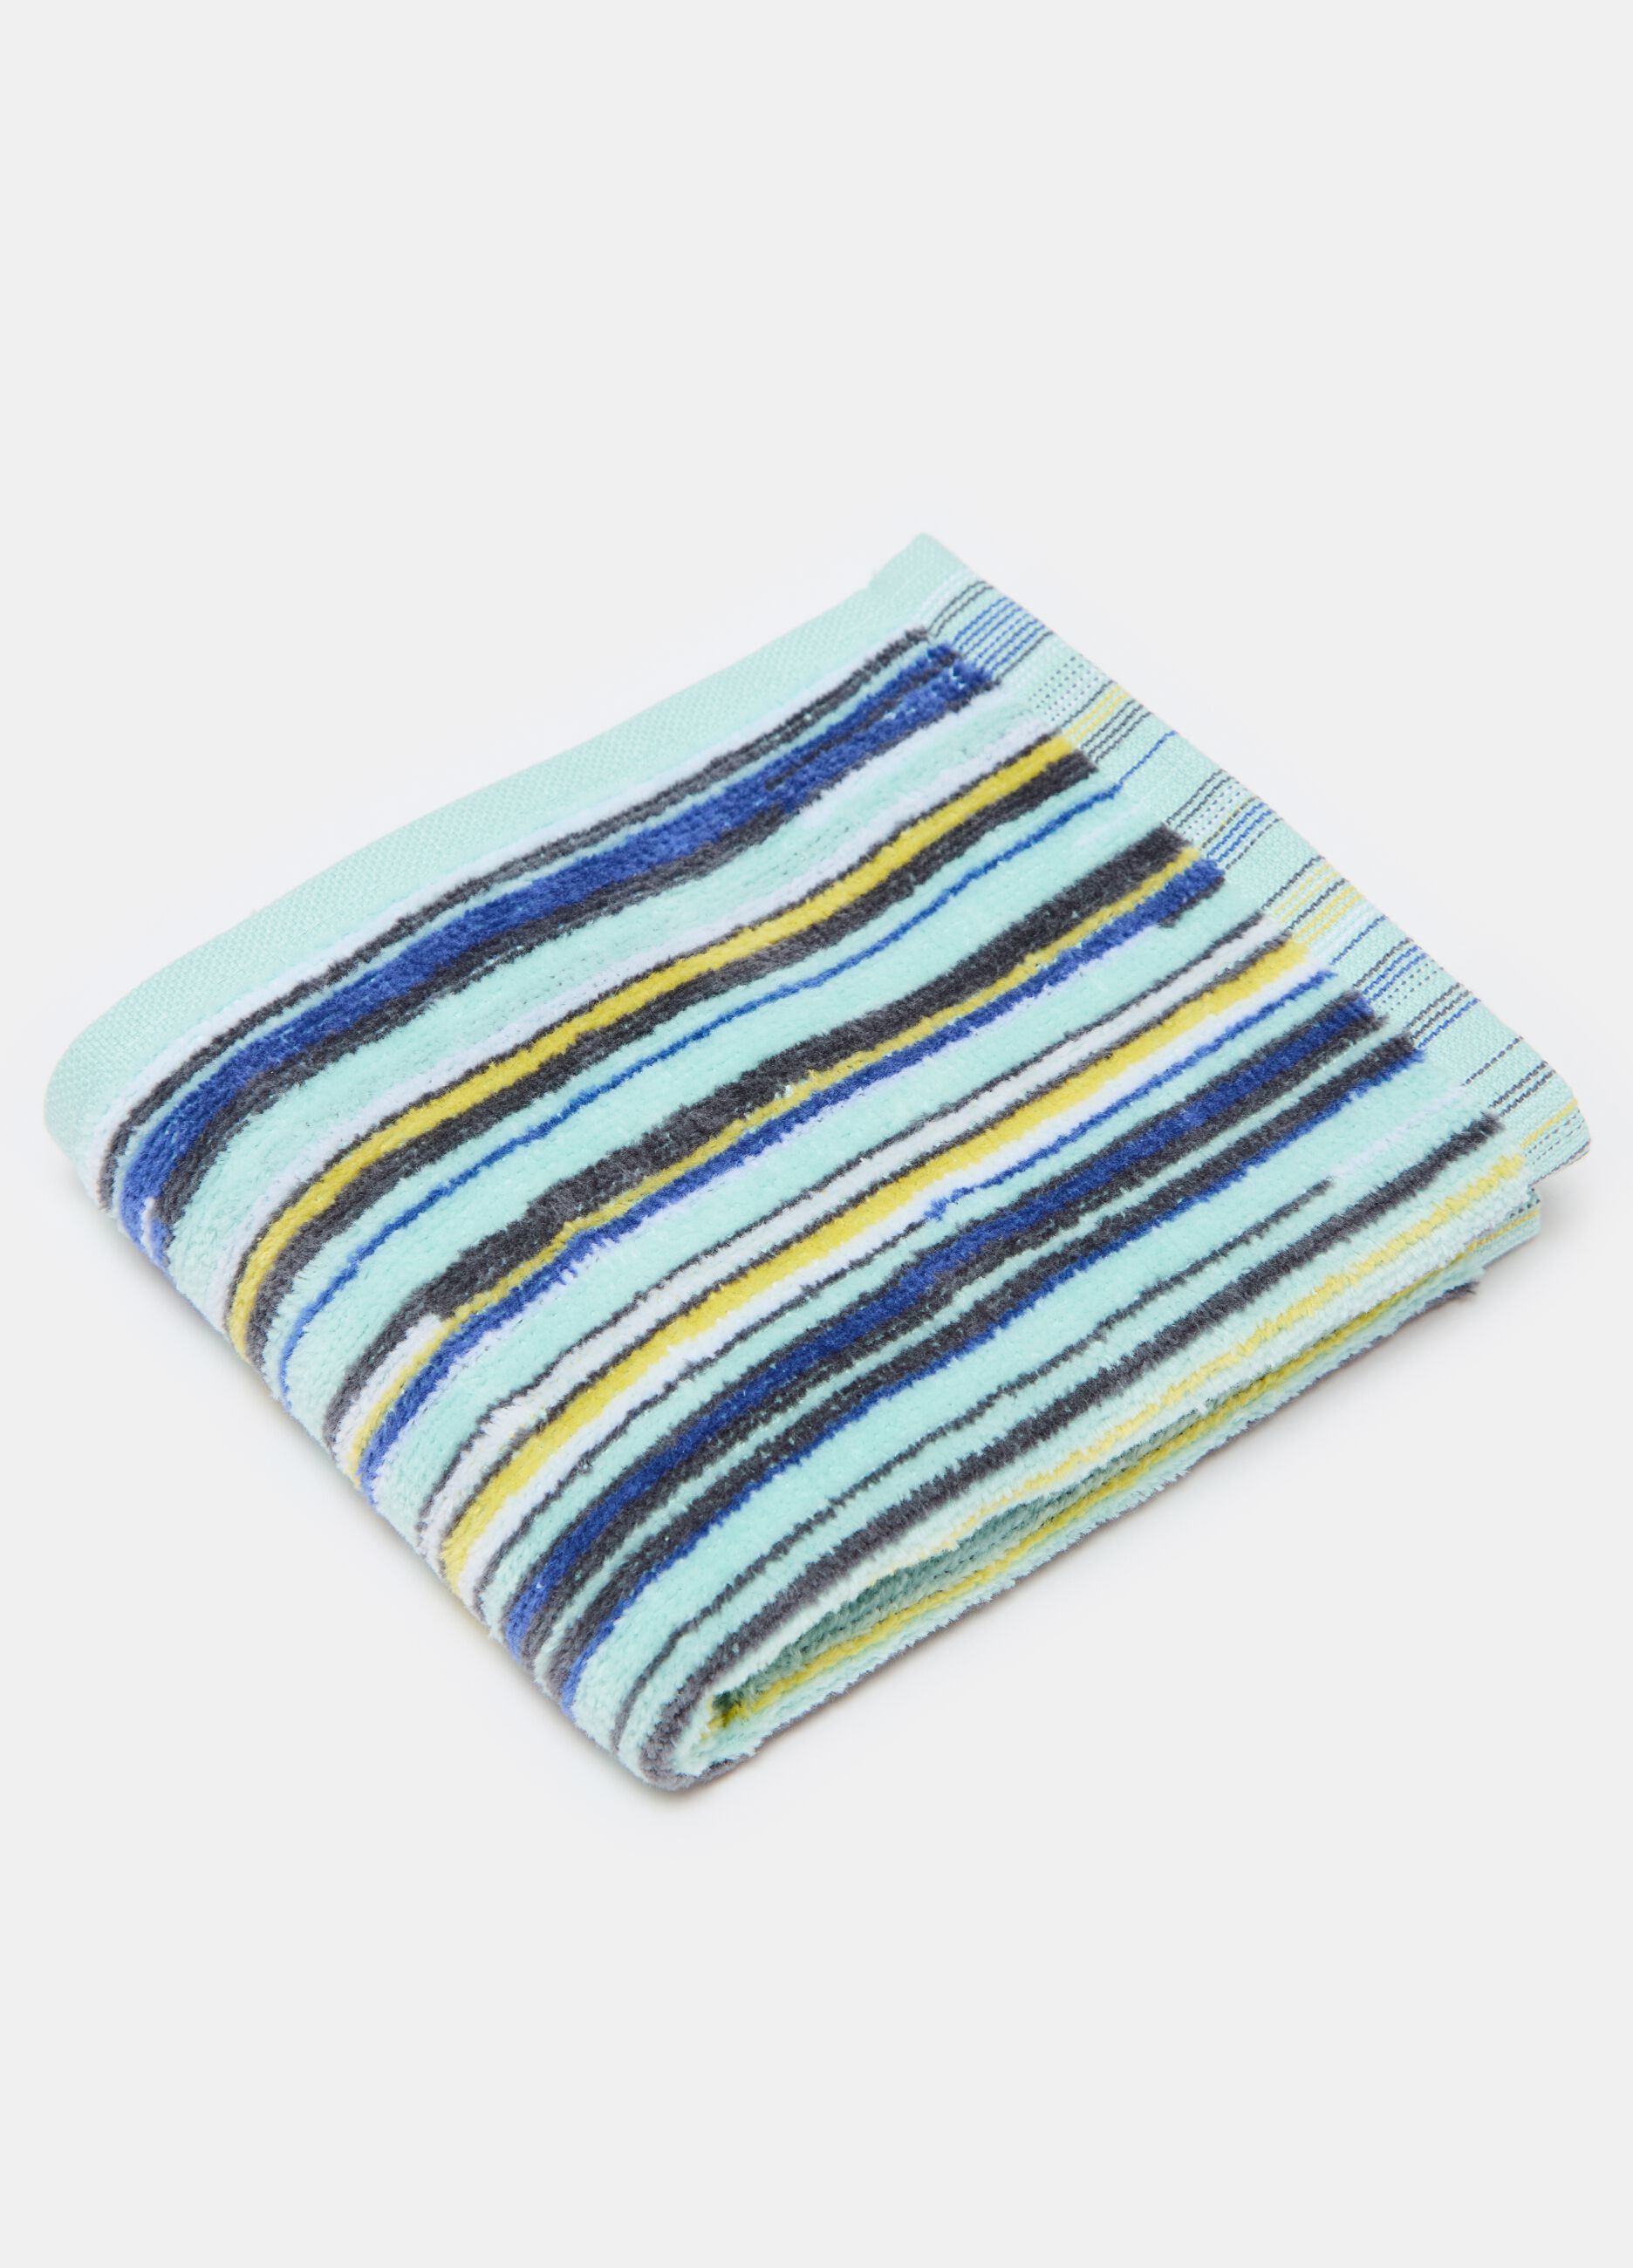 Guest towel with striped pattern